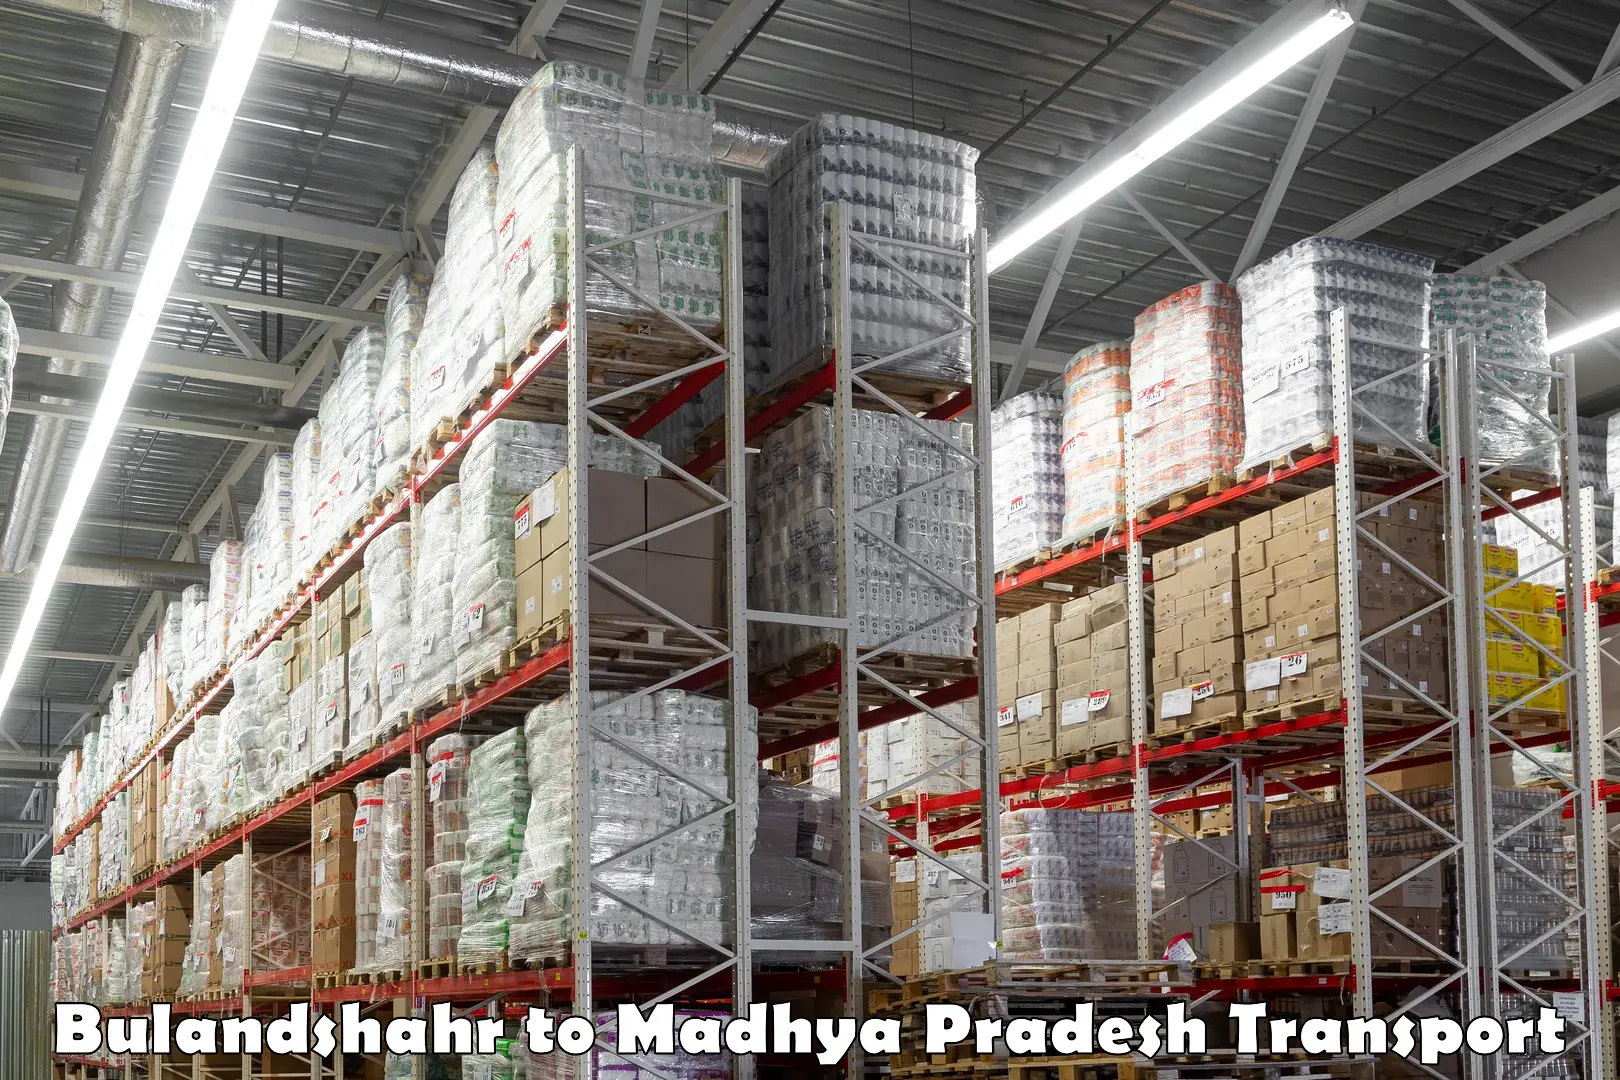 Part load transport service in India Bulandshahr to Madwas